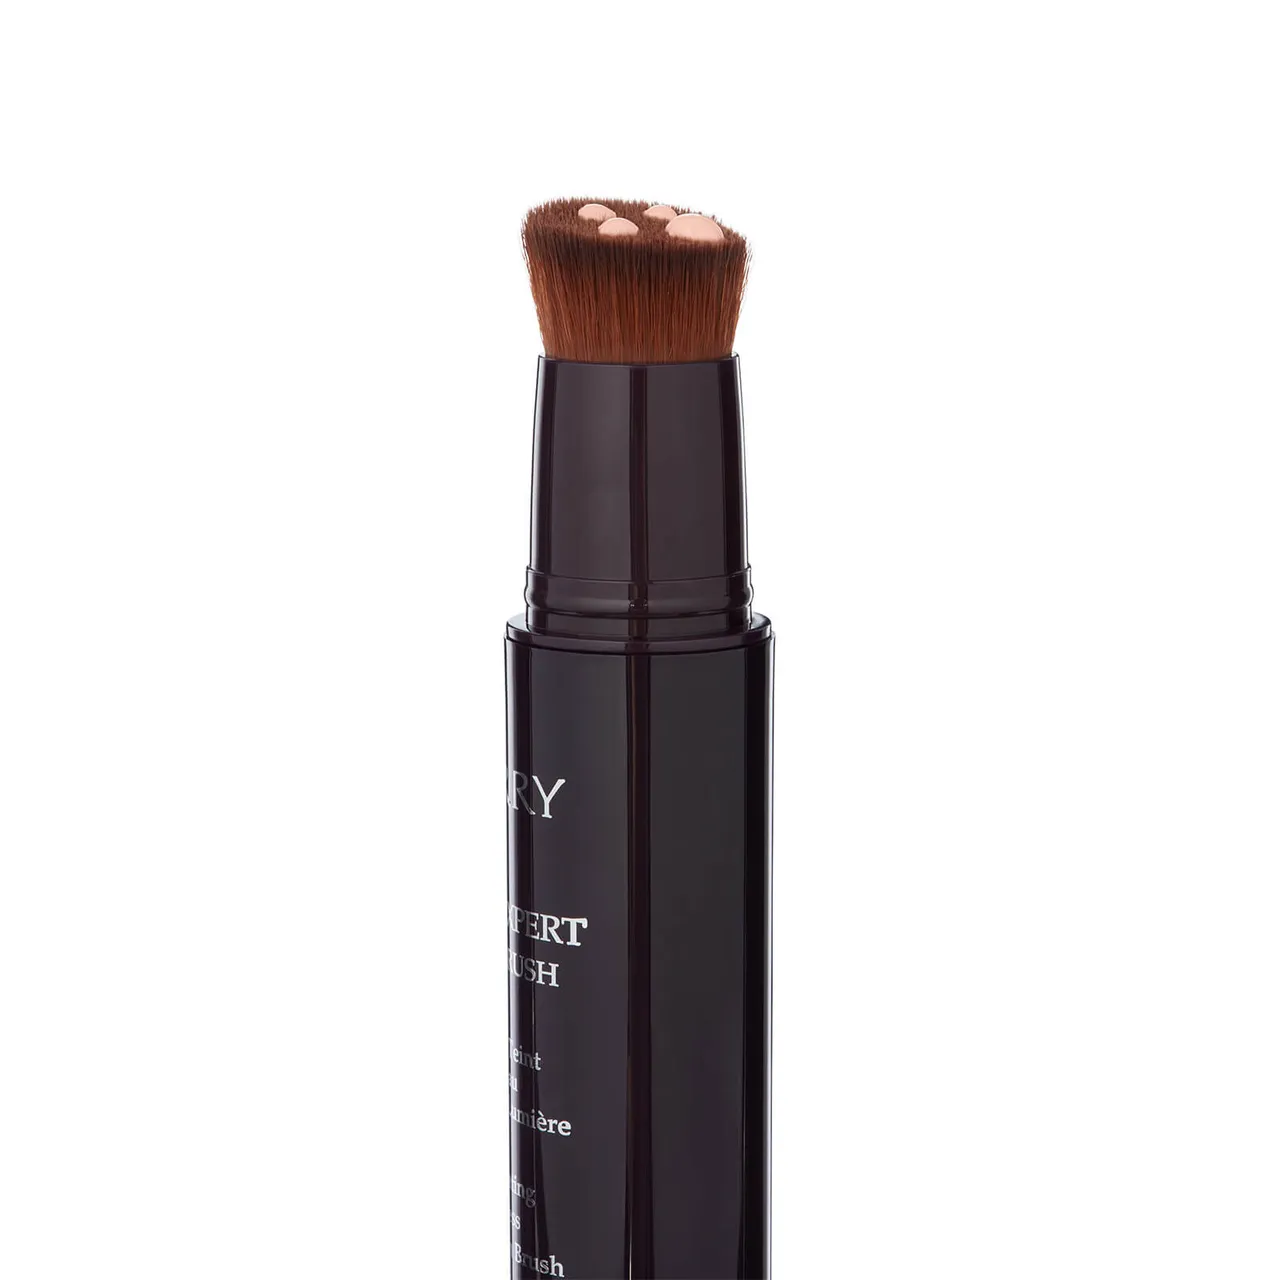 By Terry Light-Expert Click Brush Foundation 19.5ml (Various Shades) - 1. Rosy Light